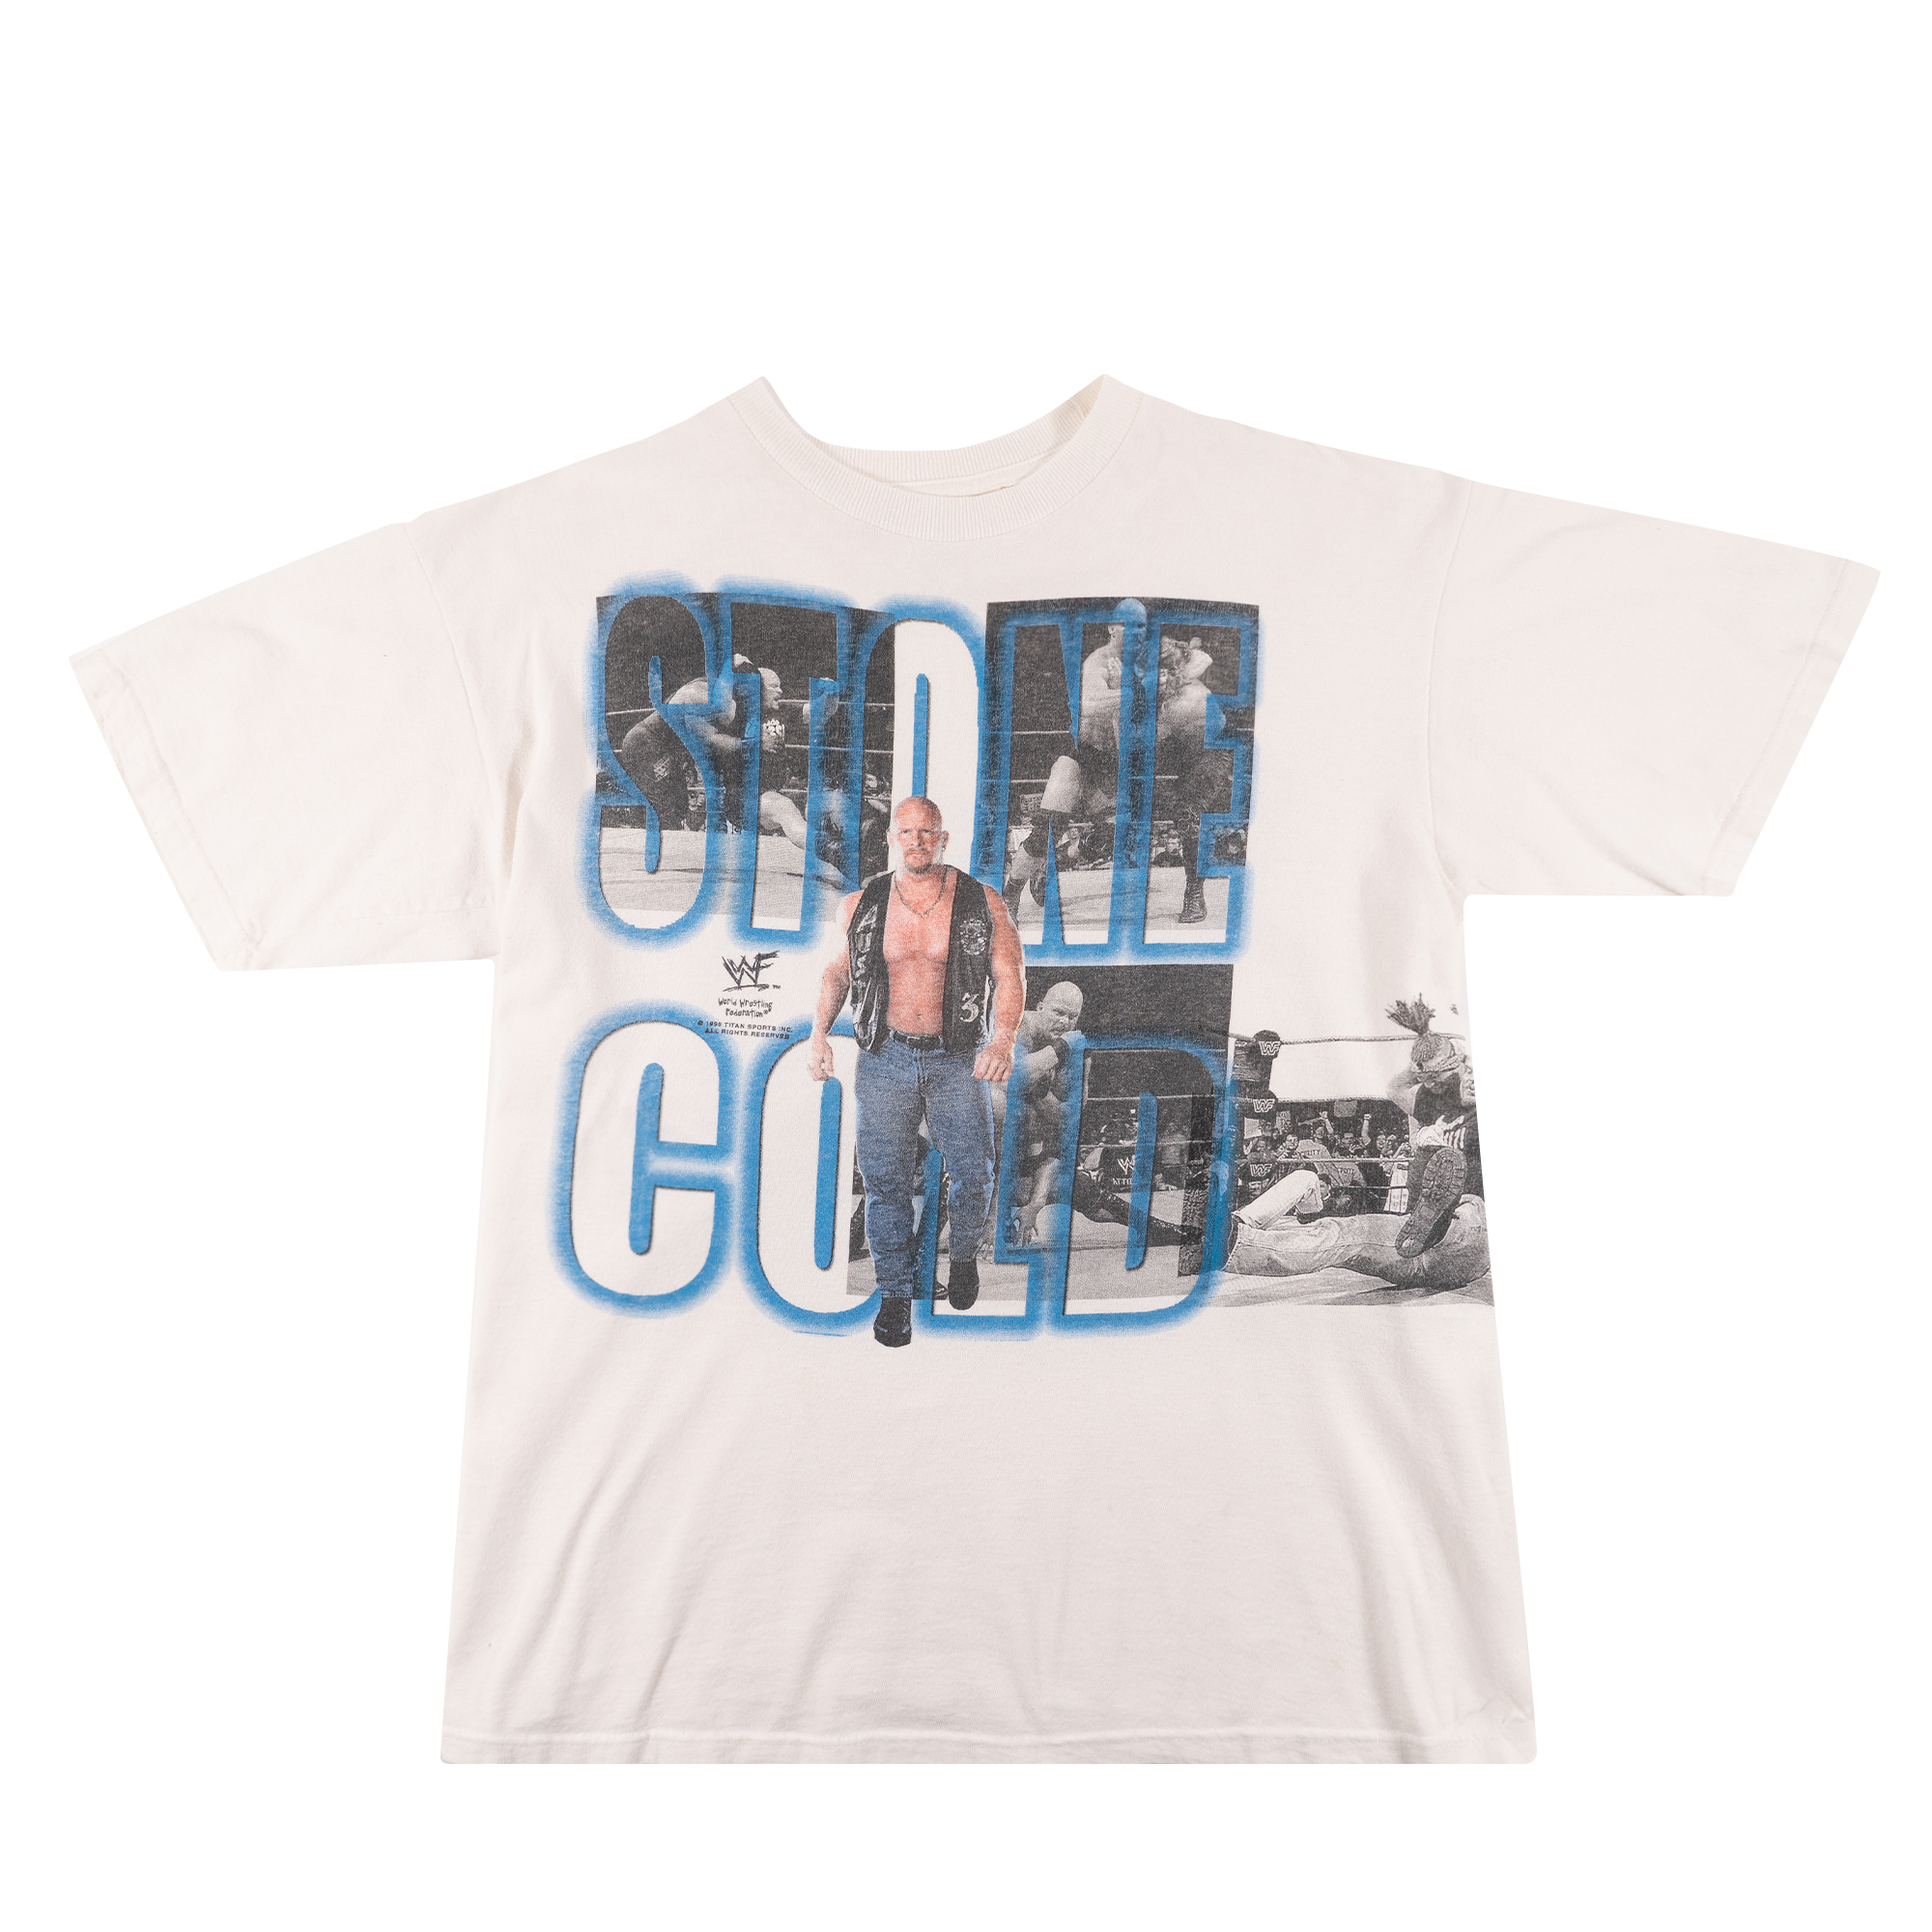 Stone Cold Steve Austin 3:16 All Over Print Blue Grey And Graphic Tee White-PLUS